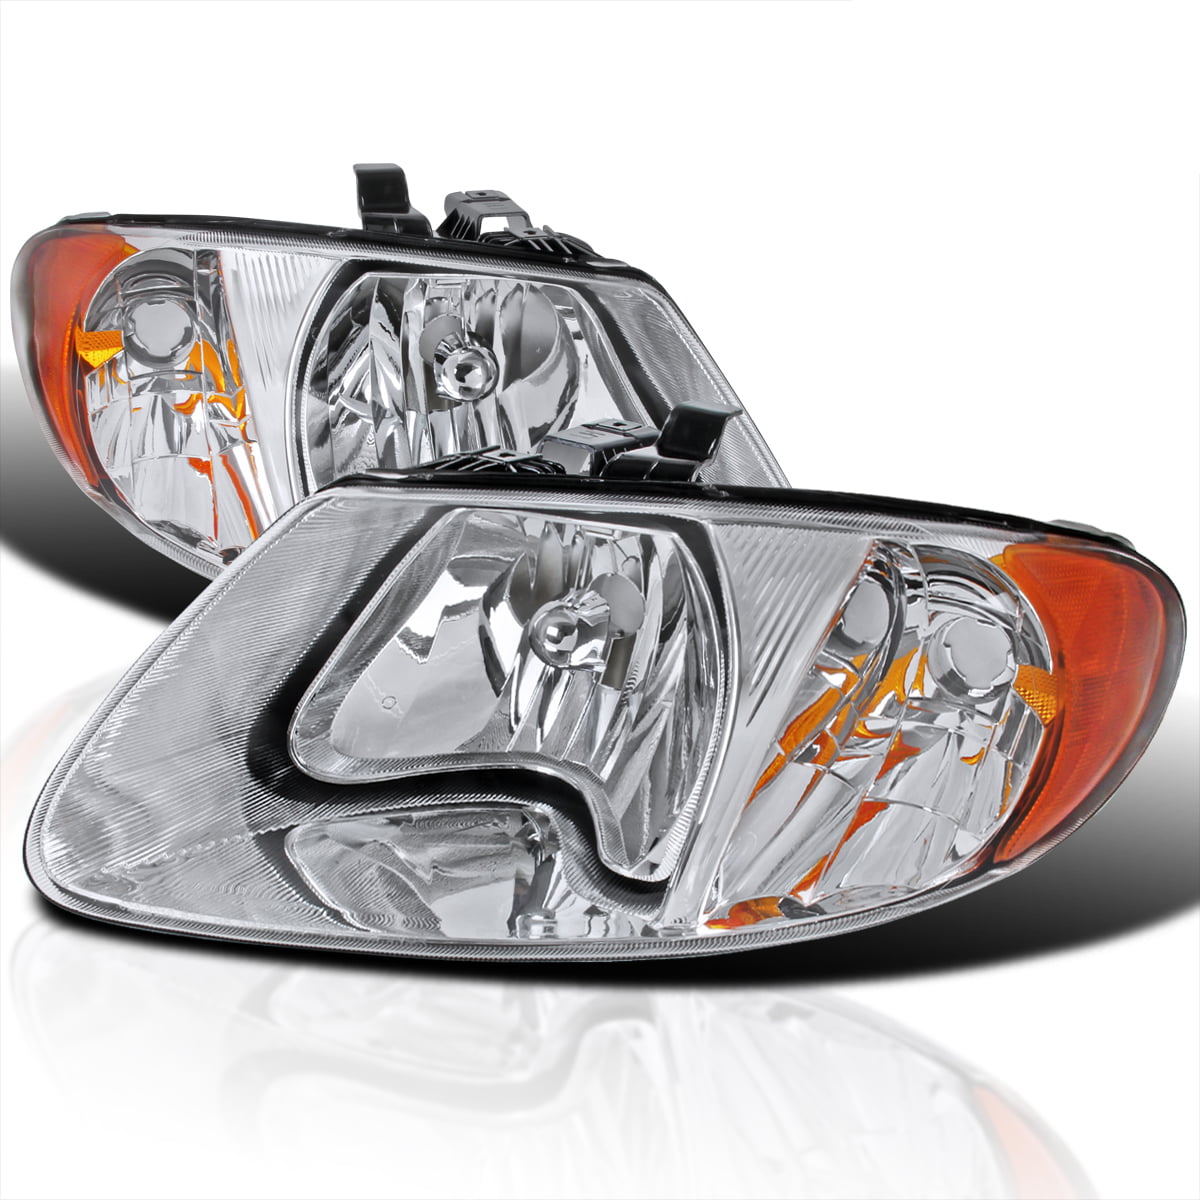 HEADLIGHTSDEPOT Chrome Housing Signal Light Compatible with Chrysler Dodge Caravan Town & Country Voyager Includes Right Passenger Side Signal Light Requires QUAD lamp